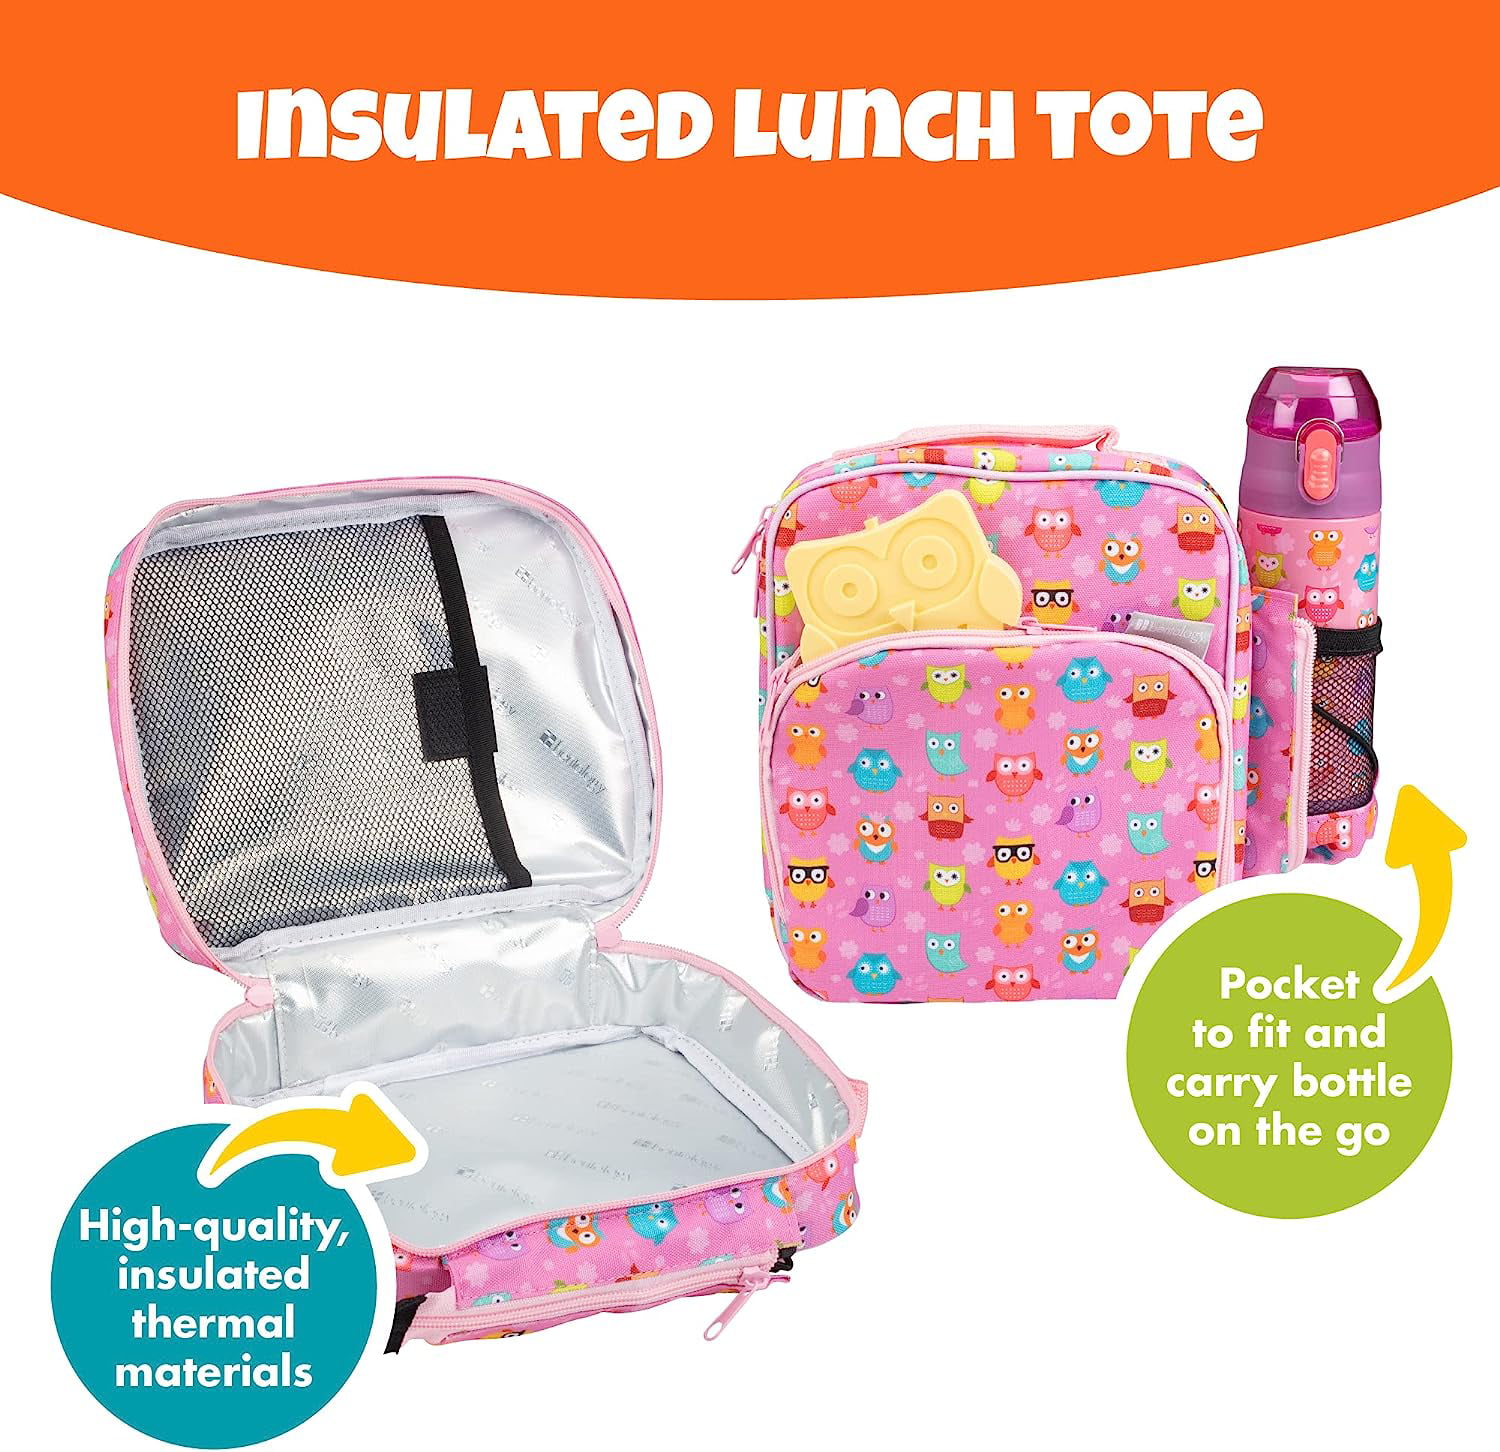 Bentology Kids Lunch Bag Set (Unicorn) W Reusable Hard Ice Pack and Double-Insulated Food Jar - Perfect Lunchbox Kits for Girls Back to School